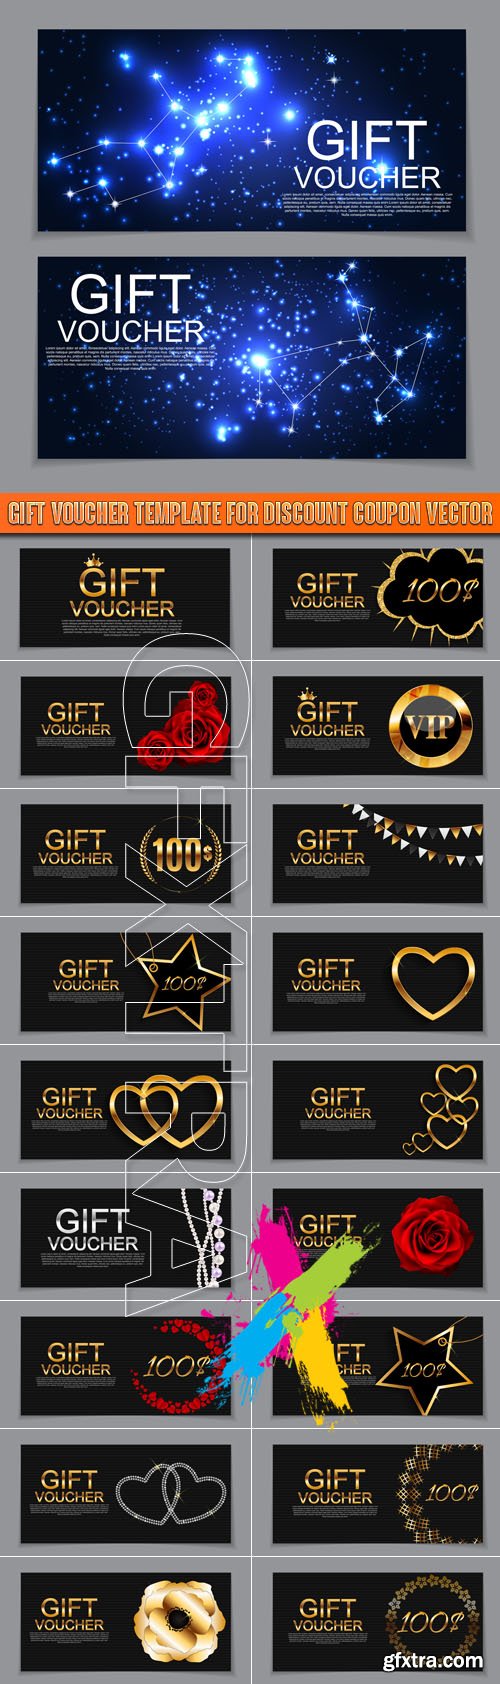 Gift Voucher Template for Discount Coupon vector